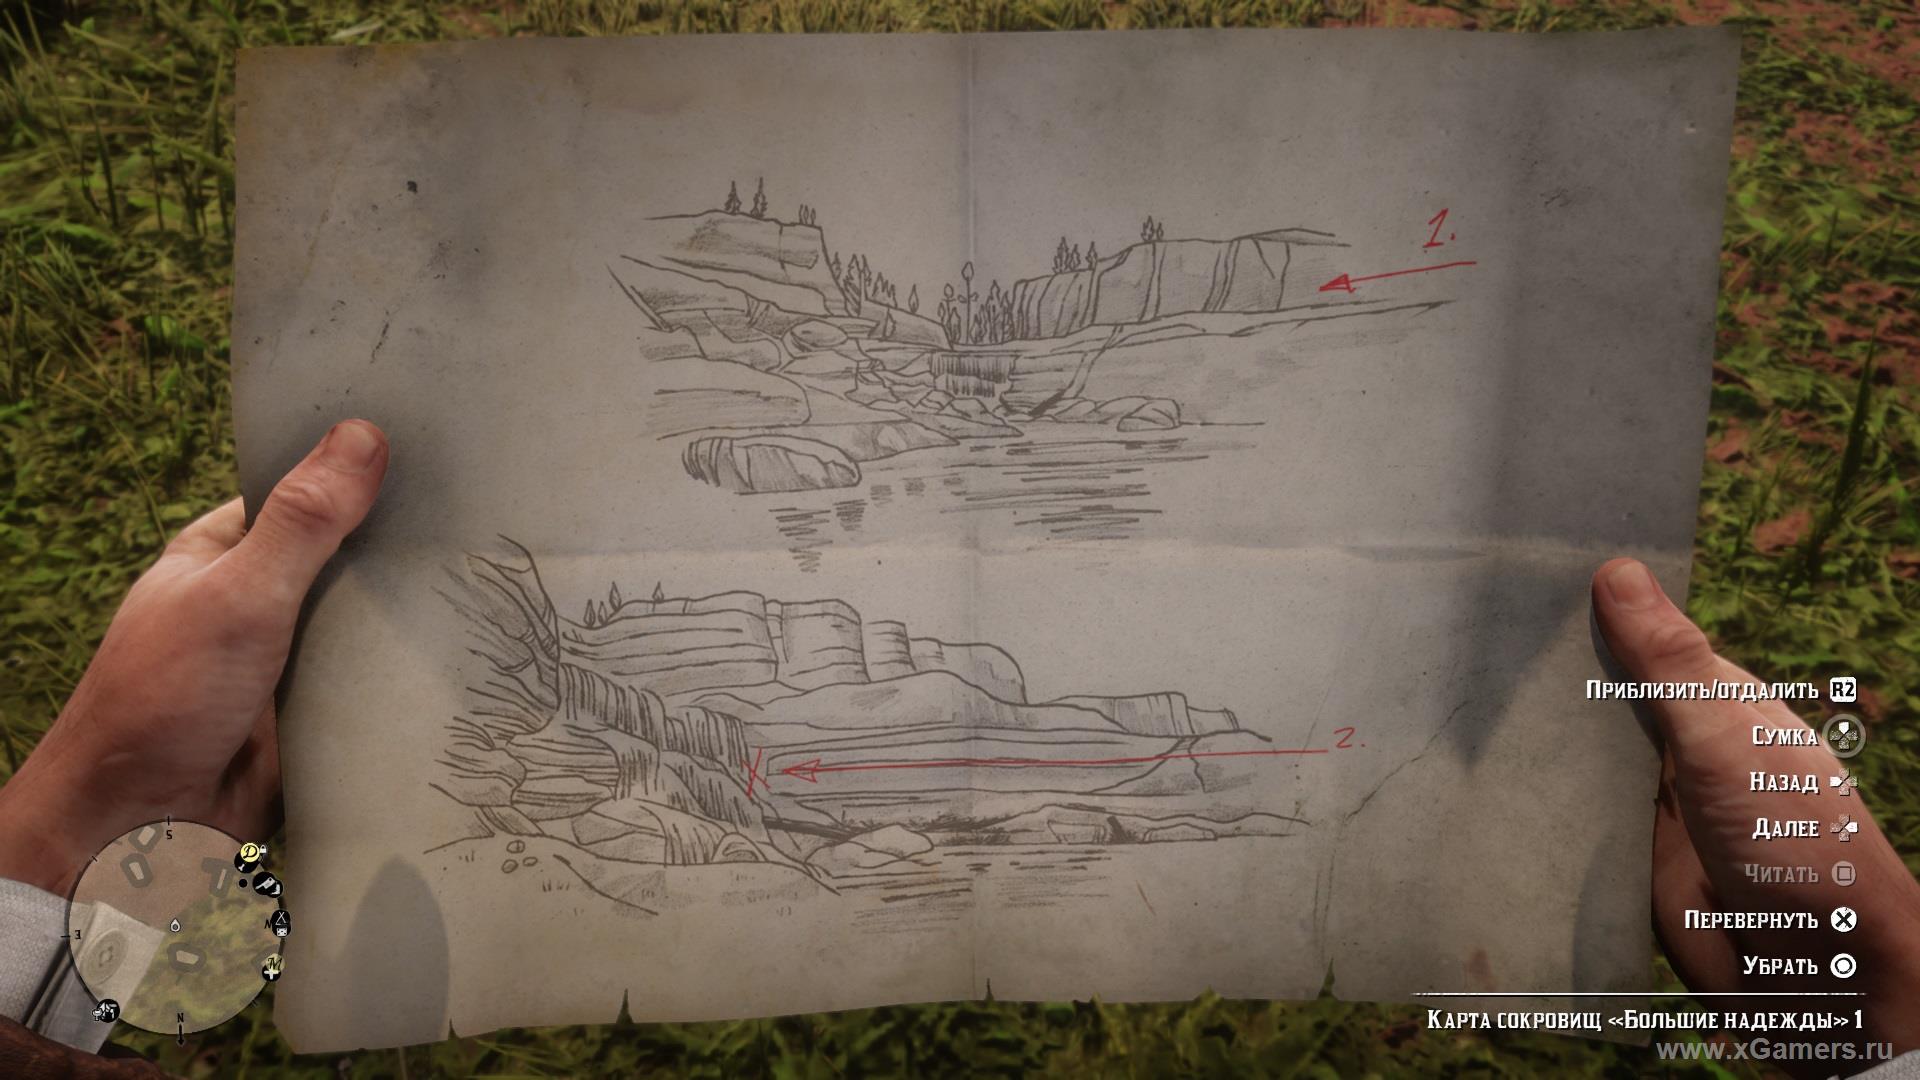 Treasures of "Great Expectations" in the game RDR 2